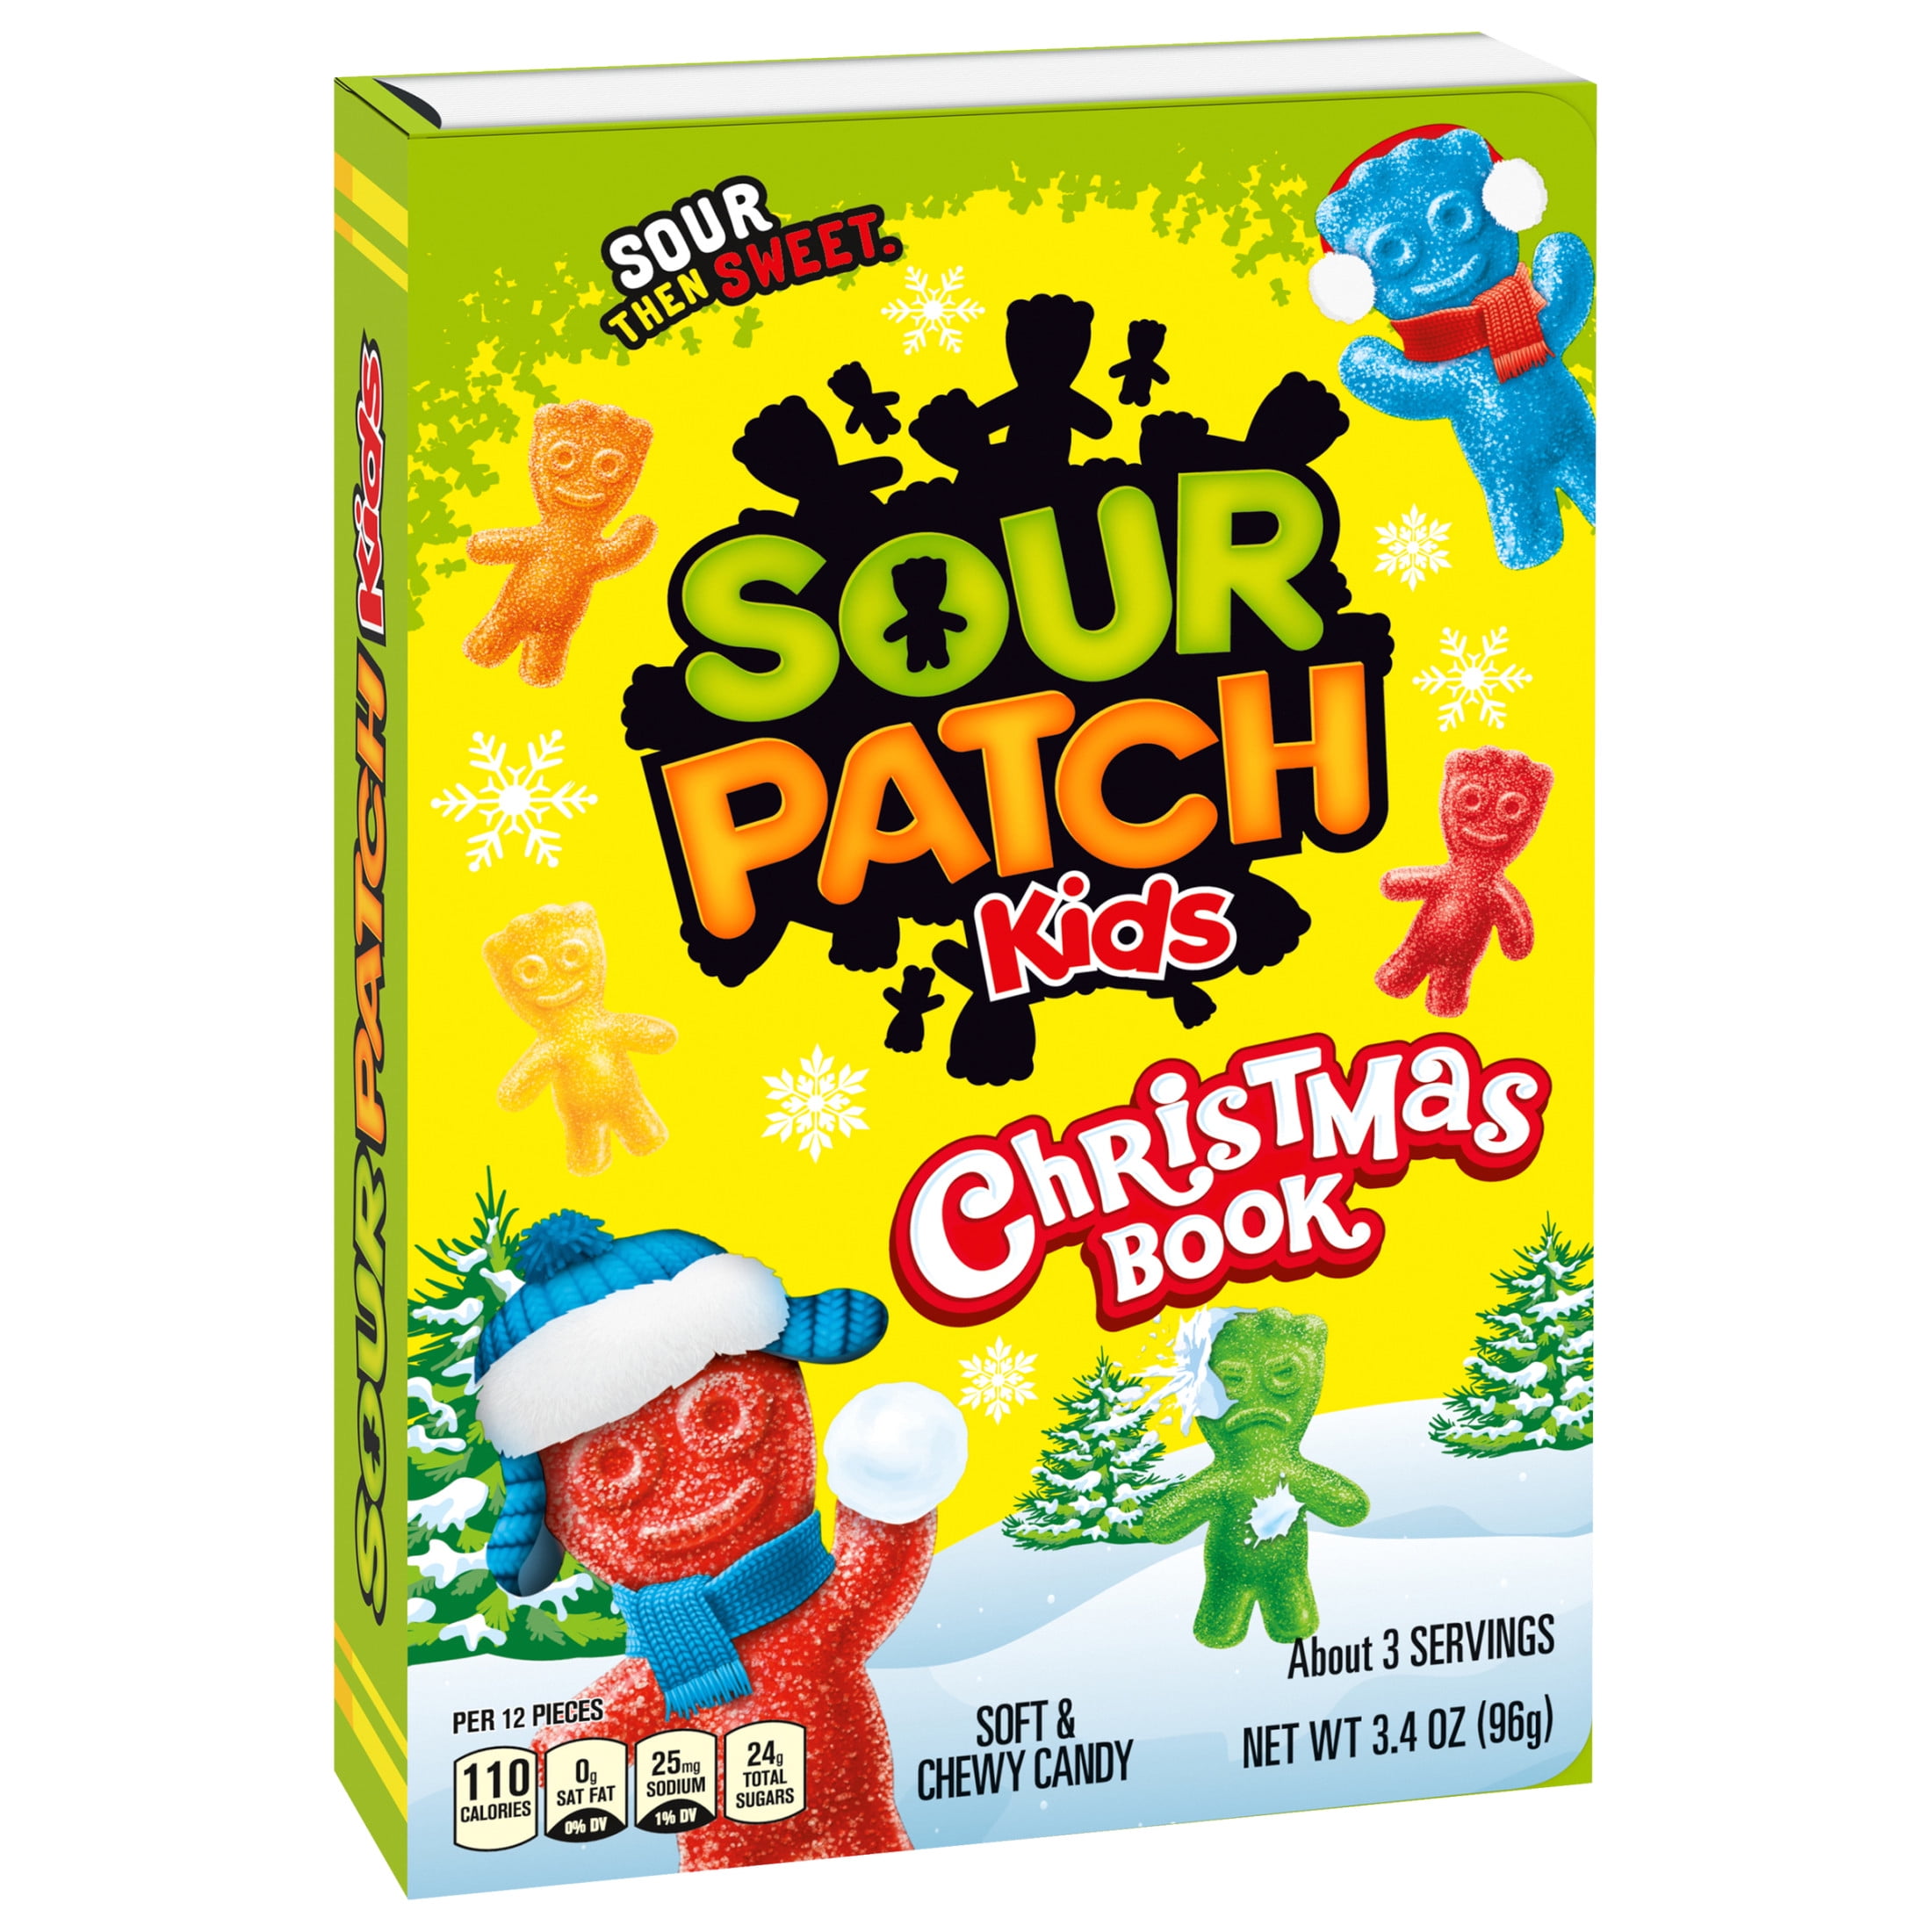 SOUR PATCH KIDS Soft & Chewy Candy, Christmas Storybook, Stocking Stuffer,  3.4 oz 